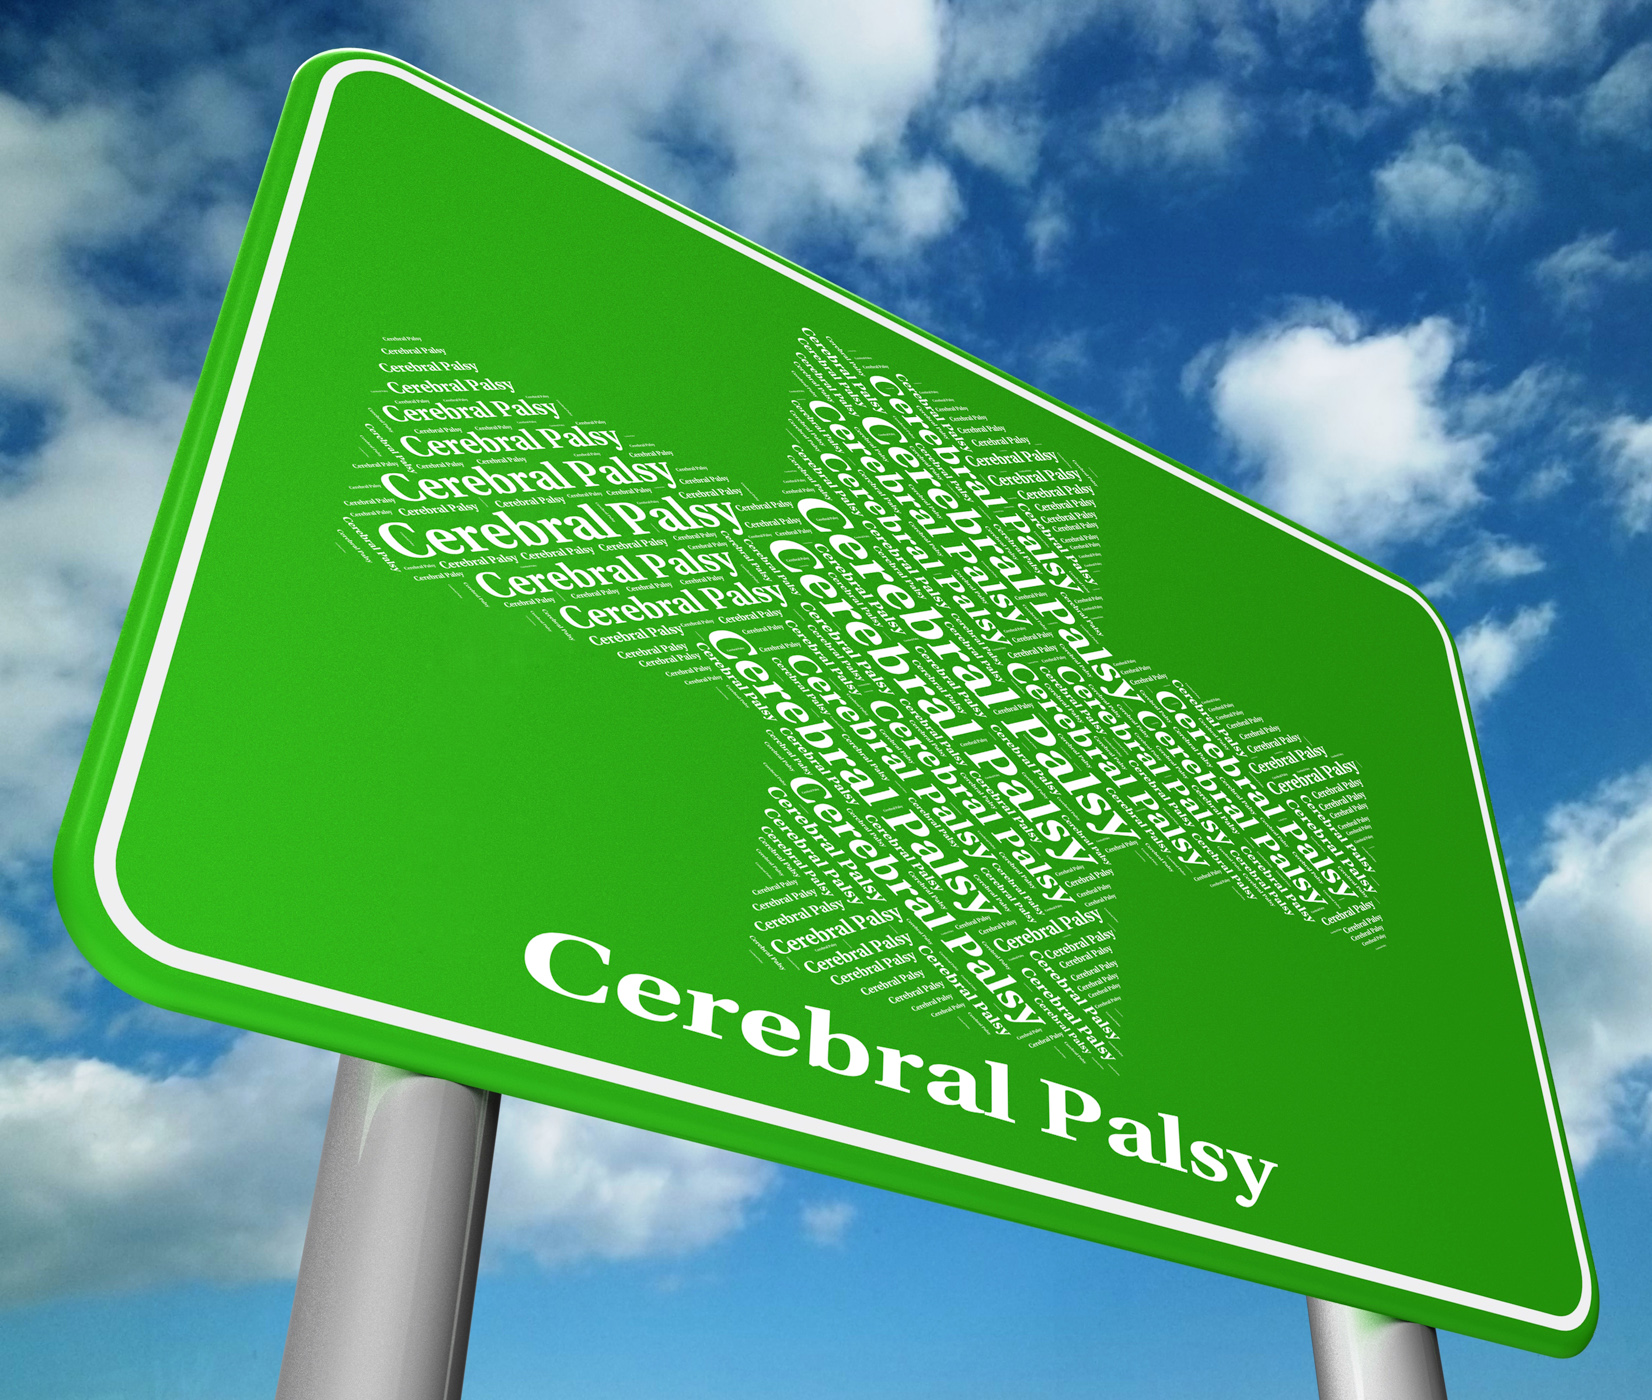 Cerebral palsy shows ill health and ailment photo